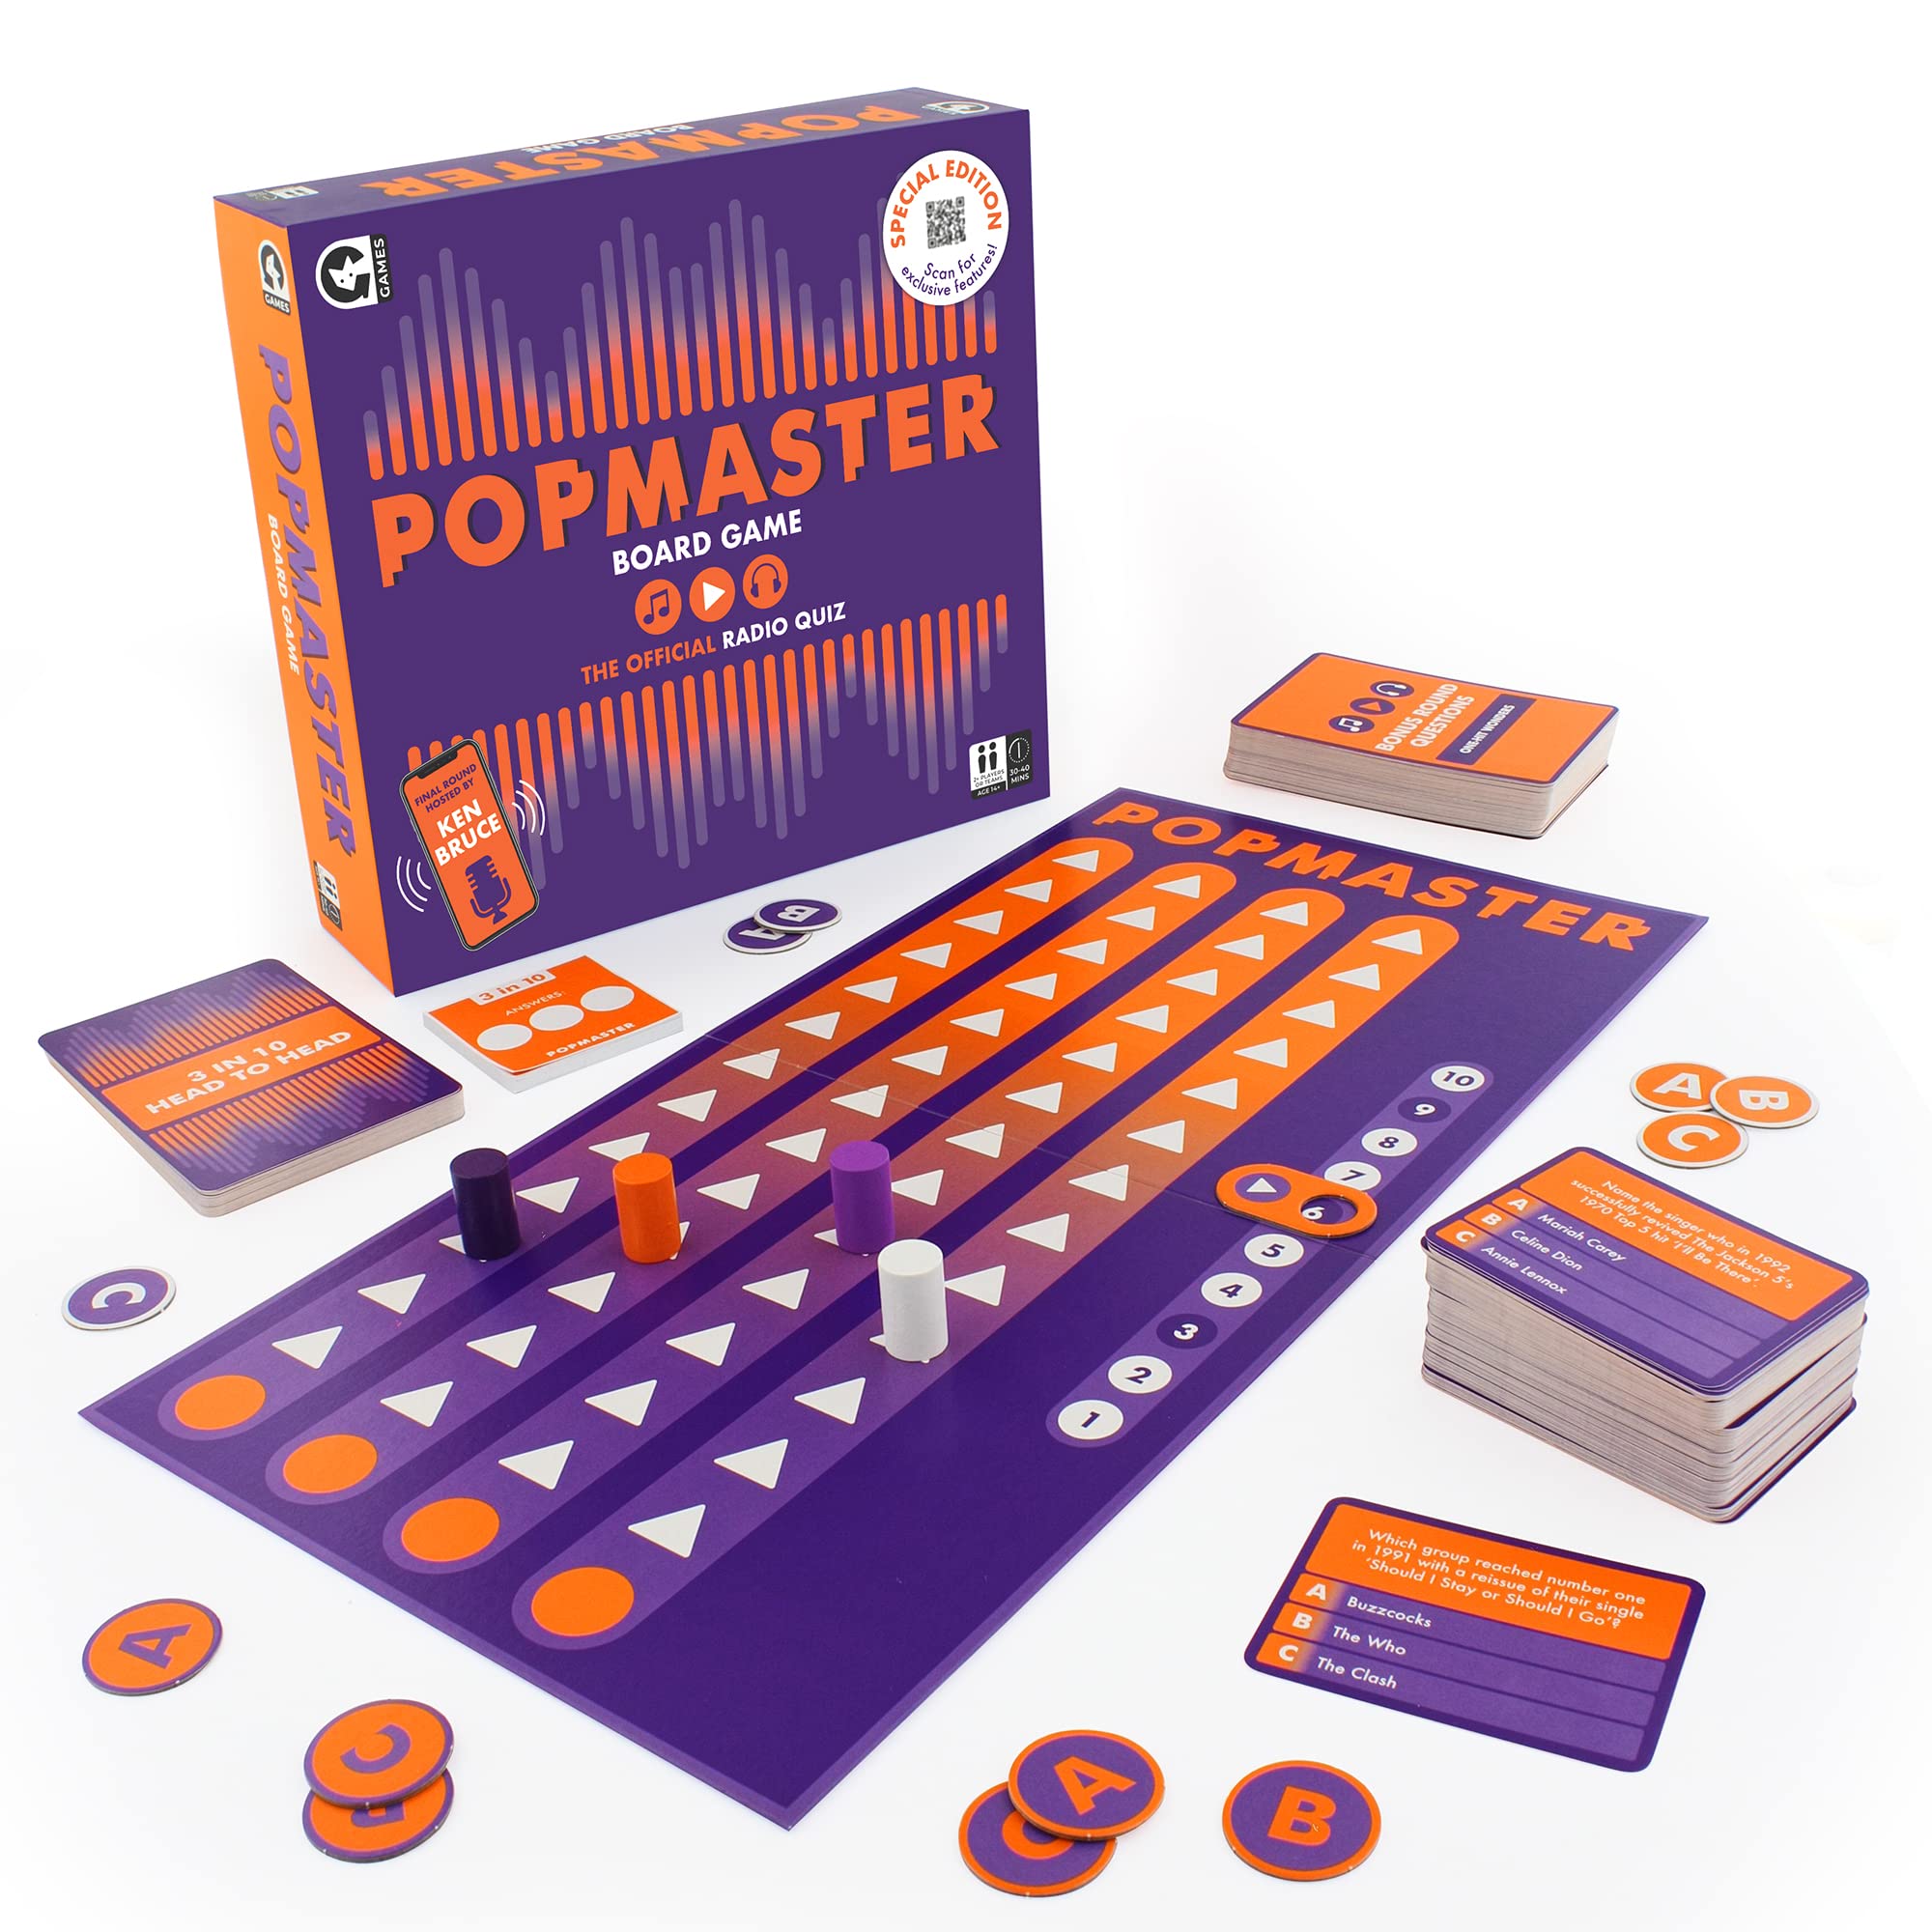 Popmaster Board Game: A Trivia Experience Like No Other